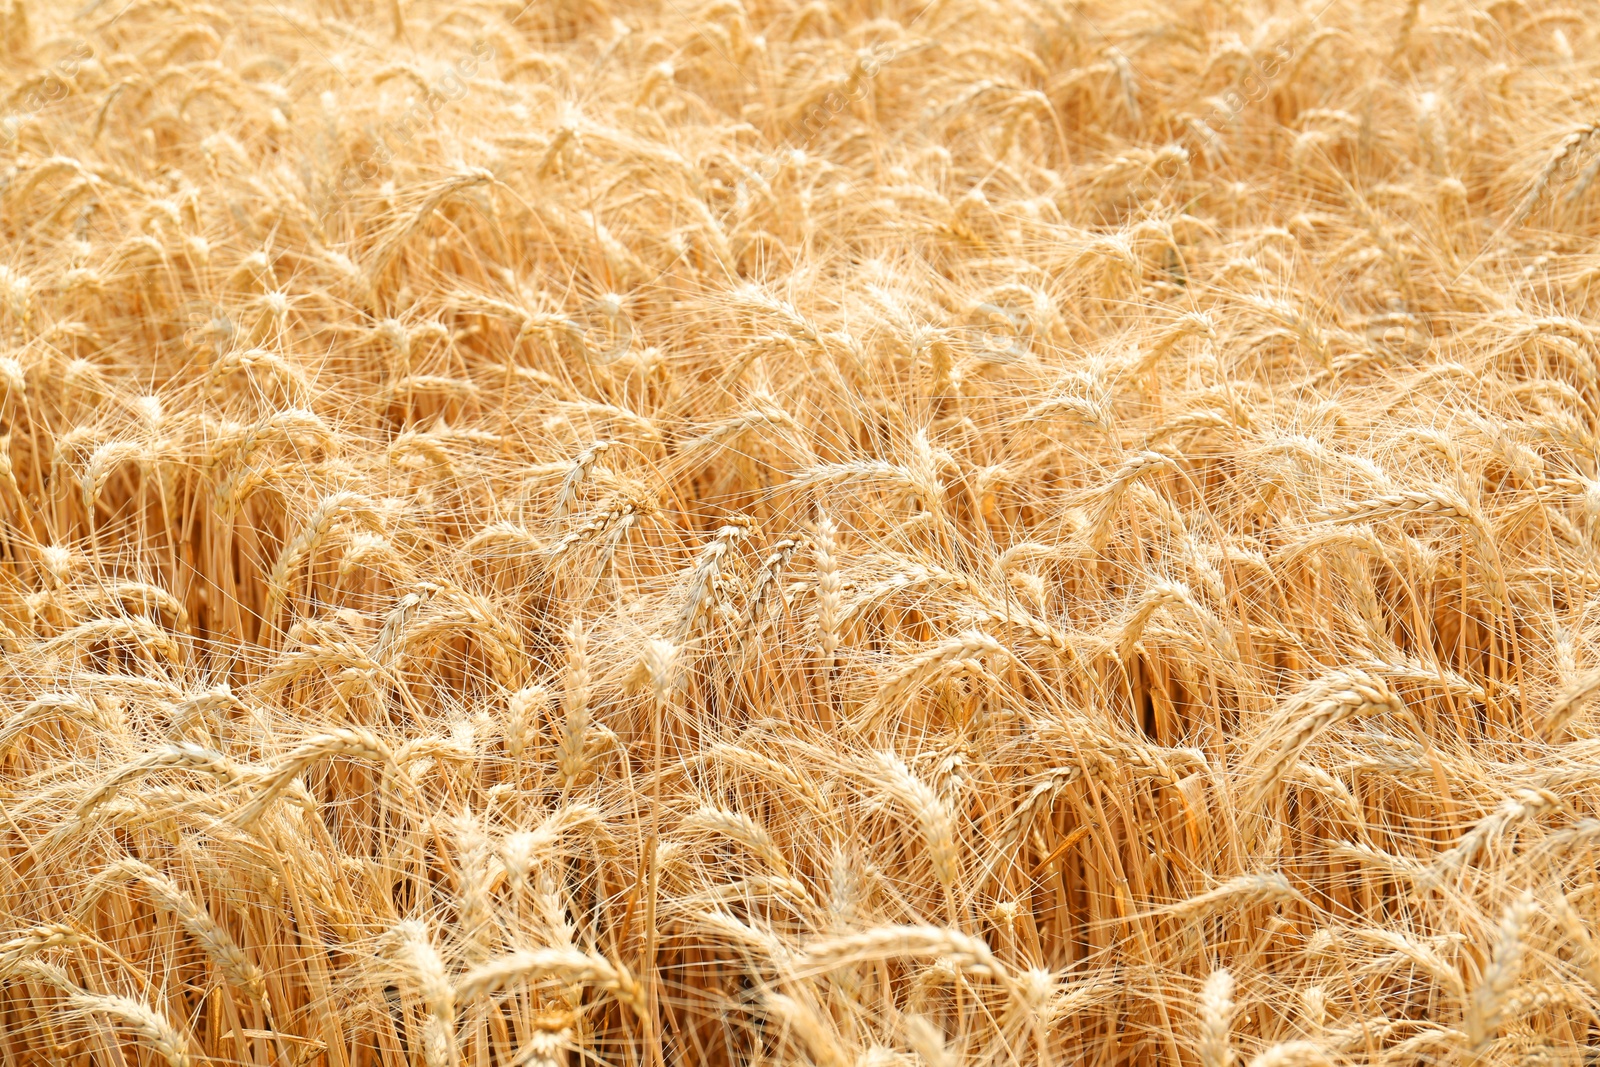 Photo of Beautiful view of agricultural field with ripe wheat spikes